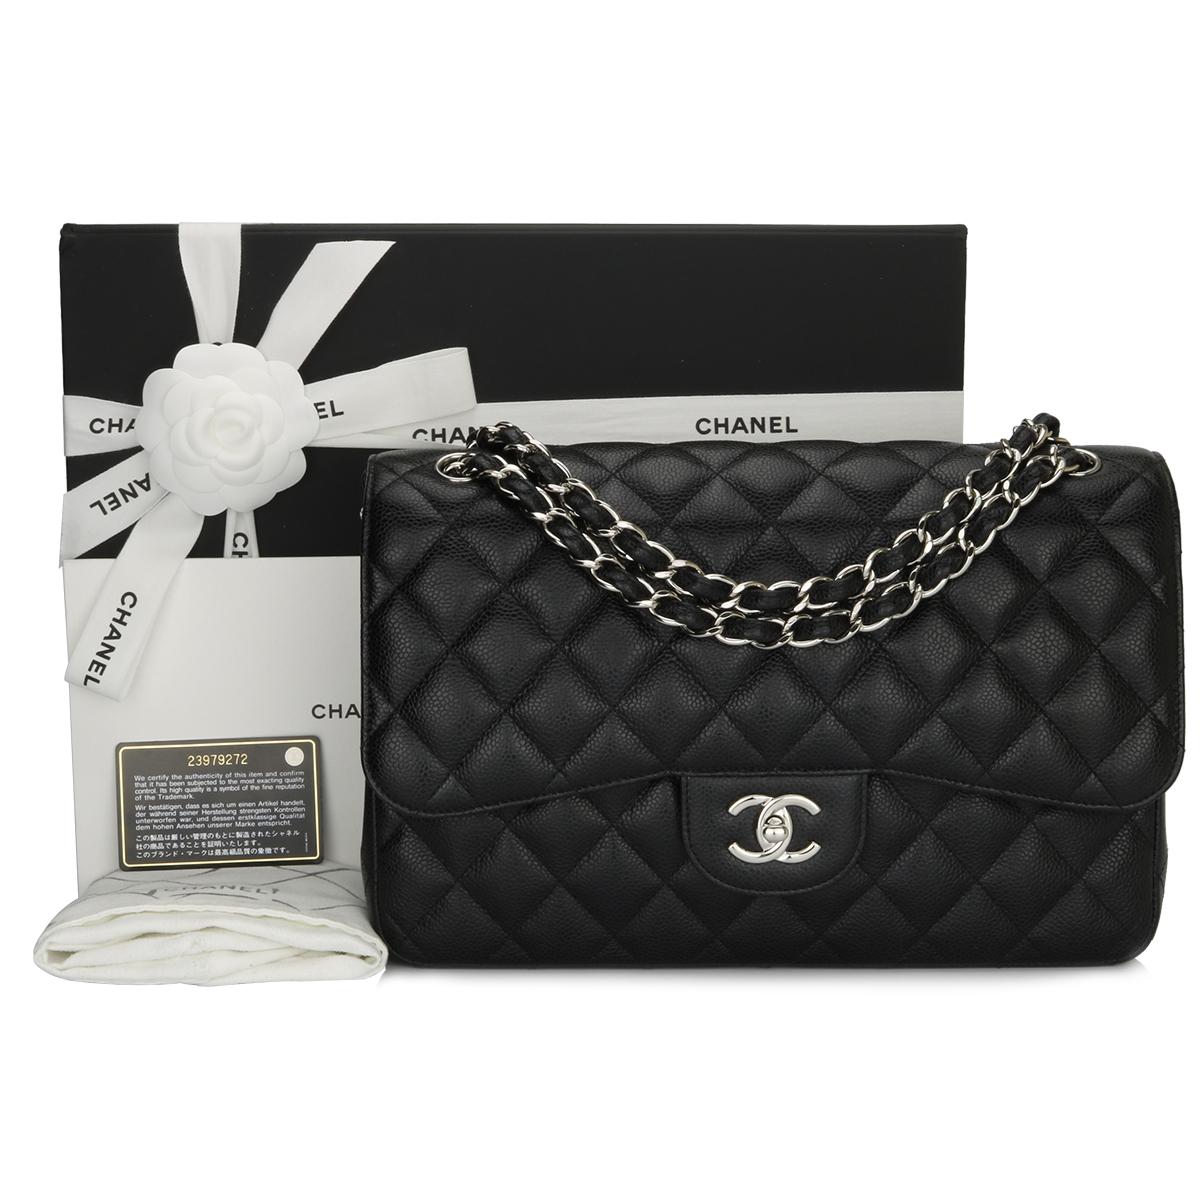 Authentic CHANEL Classic Jumbo Double Flap Bag Black Caviar with Silver Hardware 2017.

This stunning bag is in mint condition, the bag still holds its original shape, and the hardware is still very shiny. The leather smells fresh as if